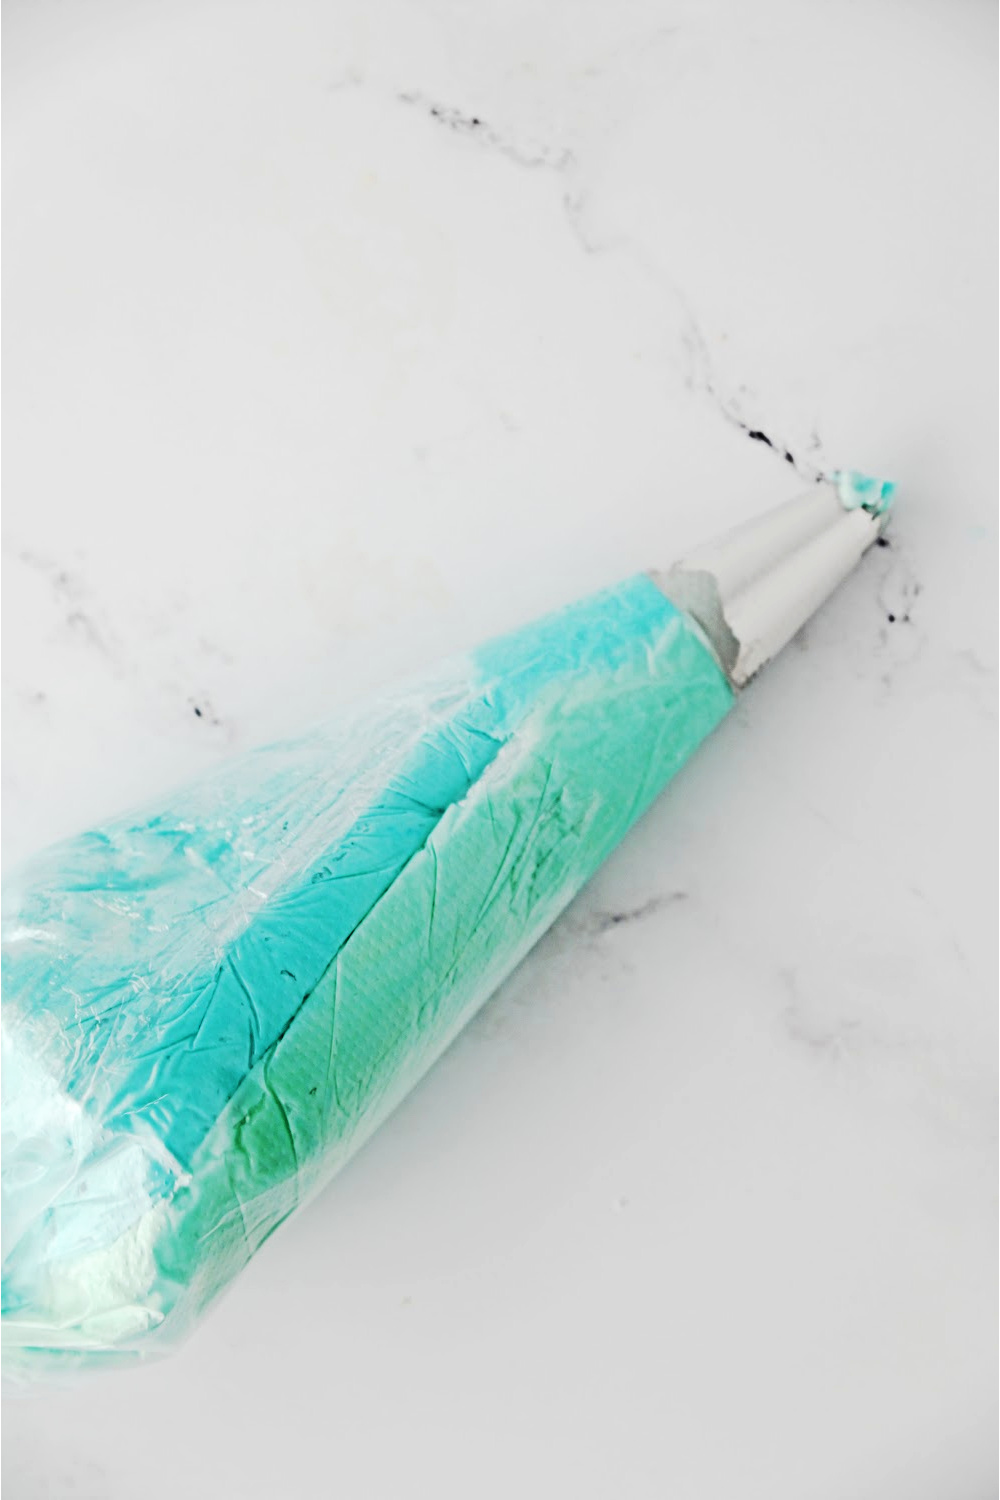 blue and light green icing wrapped individually in plastic wrapped and placed in an icing bag with a star tip.